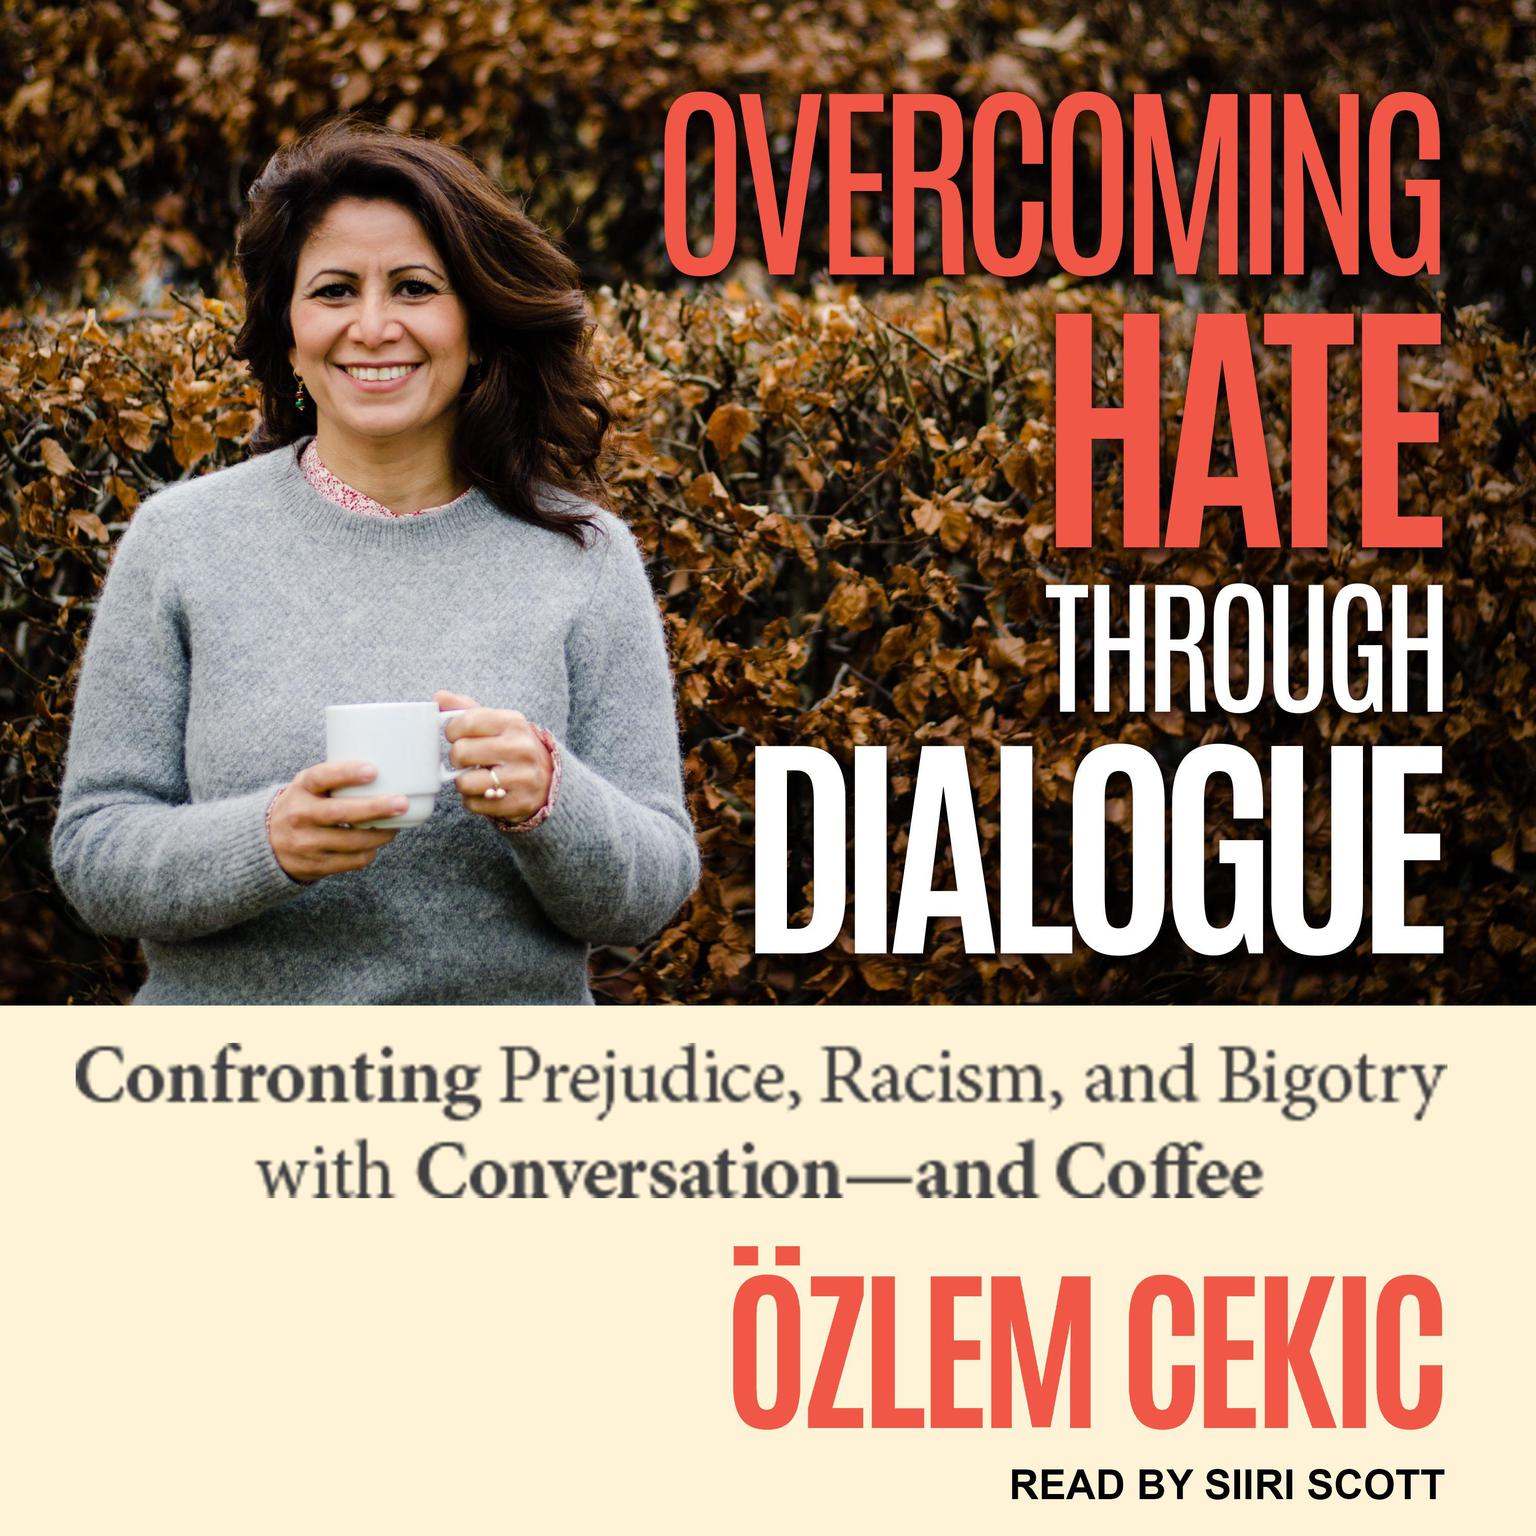 Overcoming Hate Through Dialogue: Confronting Prejudice, Racism, and Bigotry with Conversation and Coffee Audiobook, by Ozlem Cecik